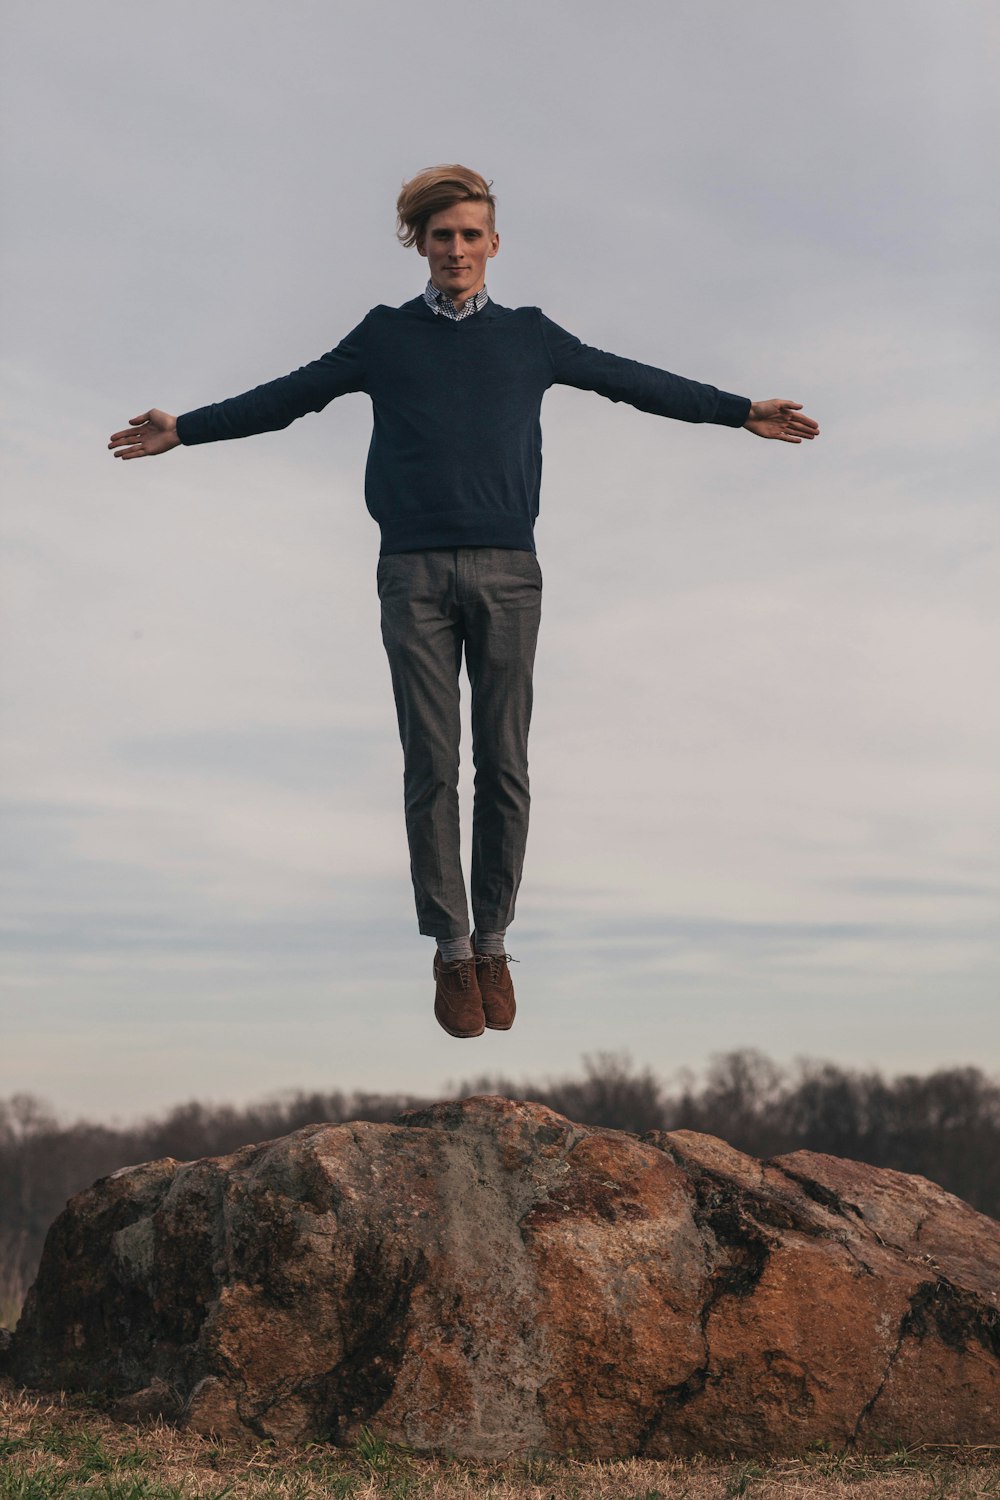 man jumping while open arms